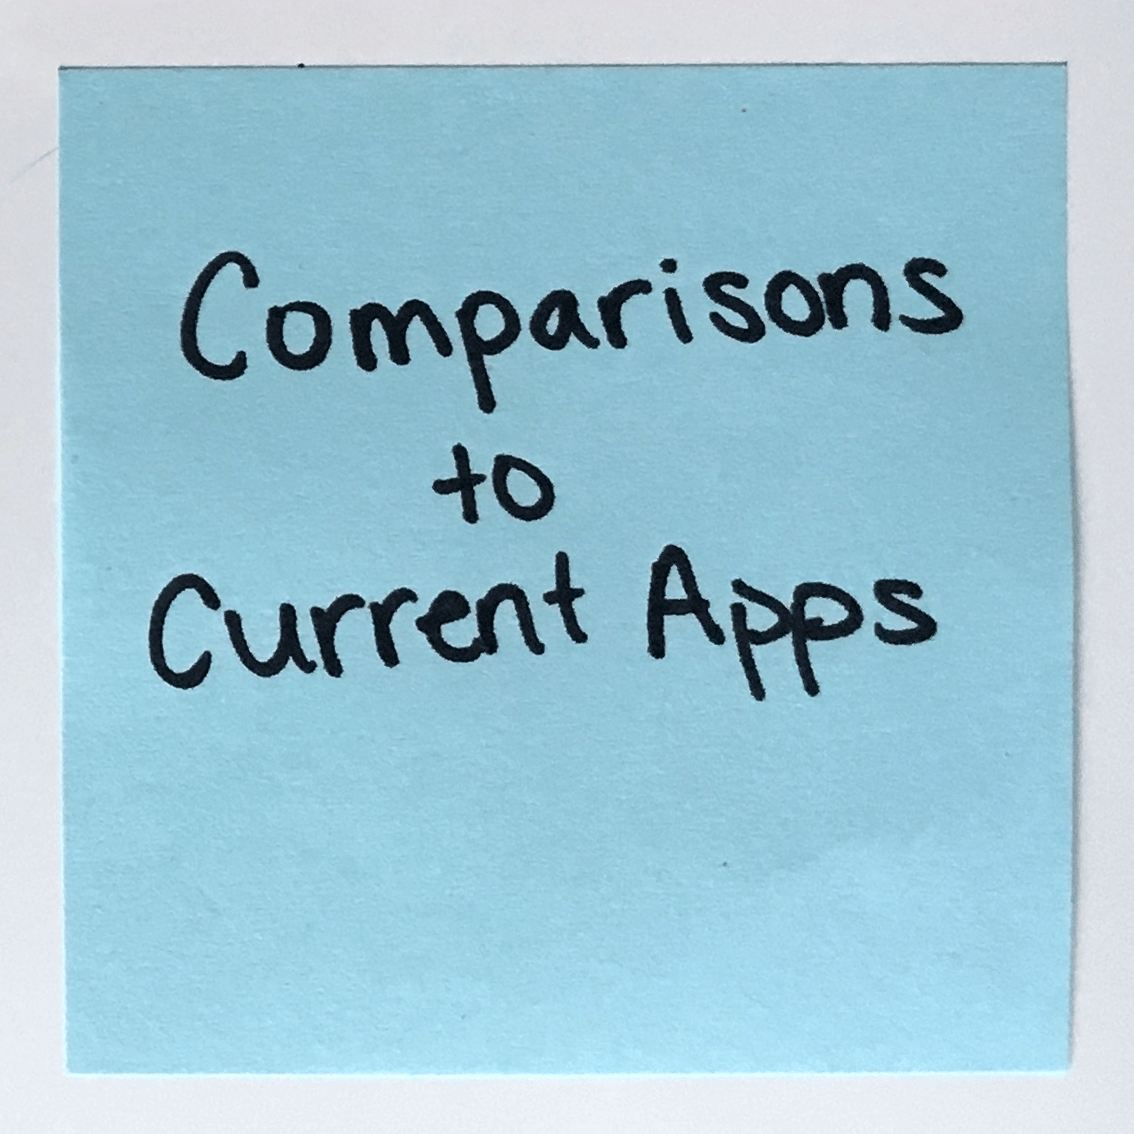 Post It with writing: 'Comparisons to Current Apps'